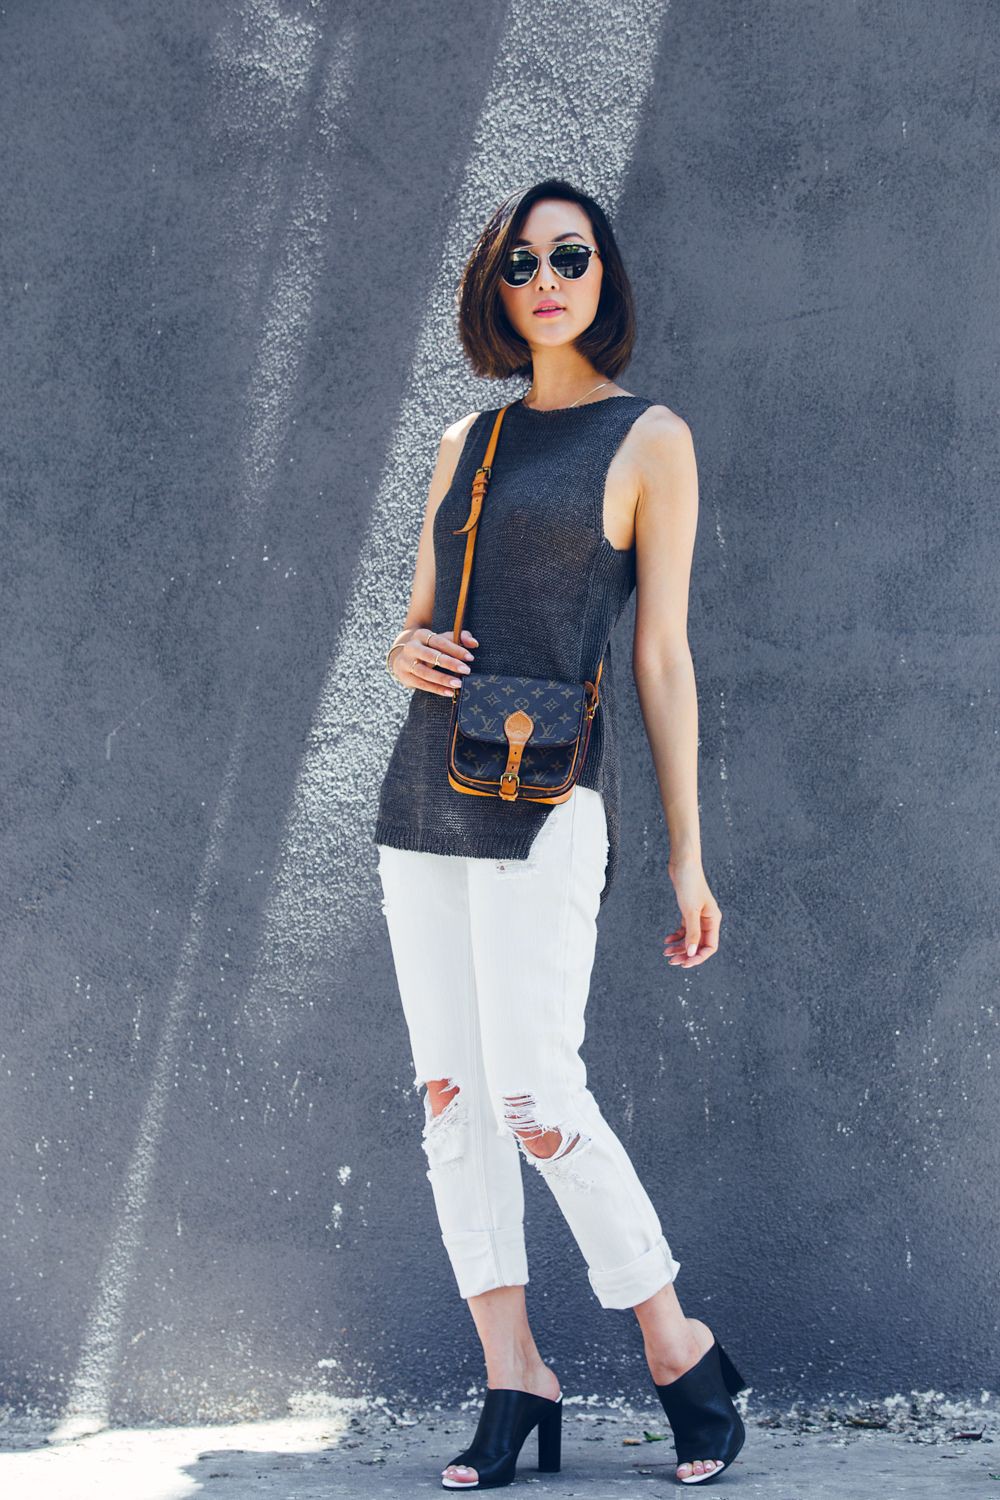 Summer Outfits With White Jeans For School: Hairstyle Ideas,  Chriselle Lim,  White Denim Outfits  